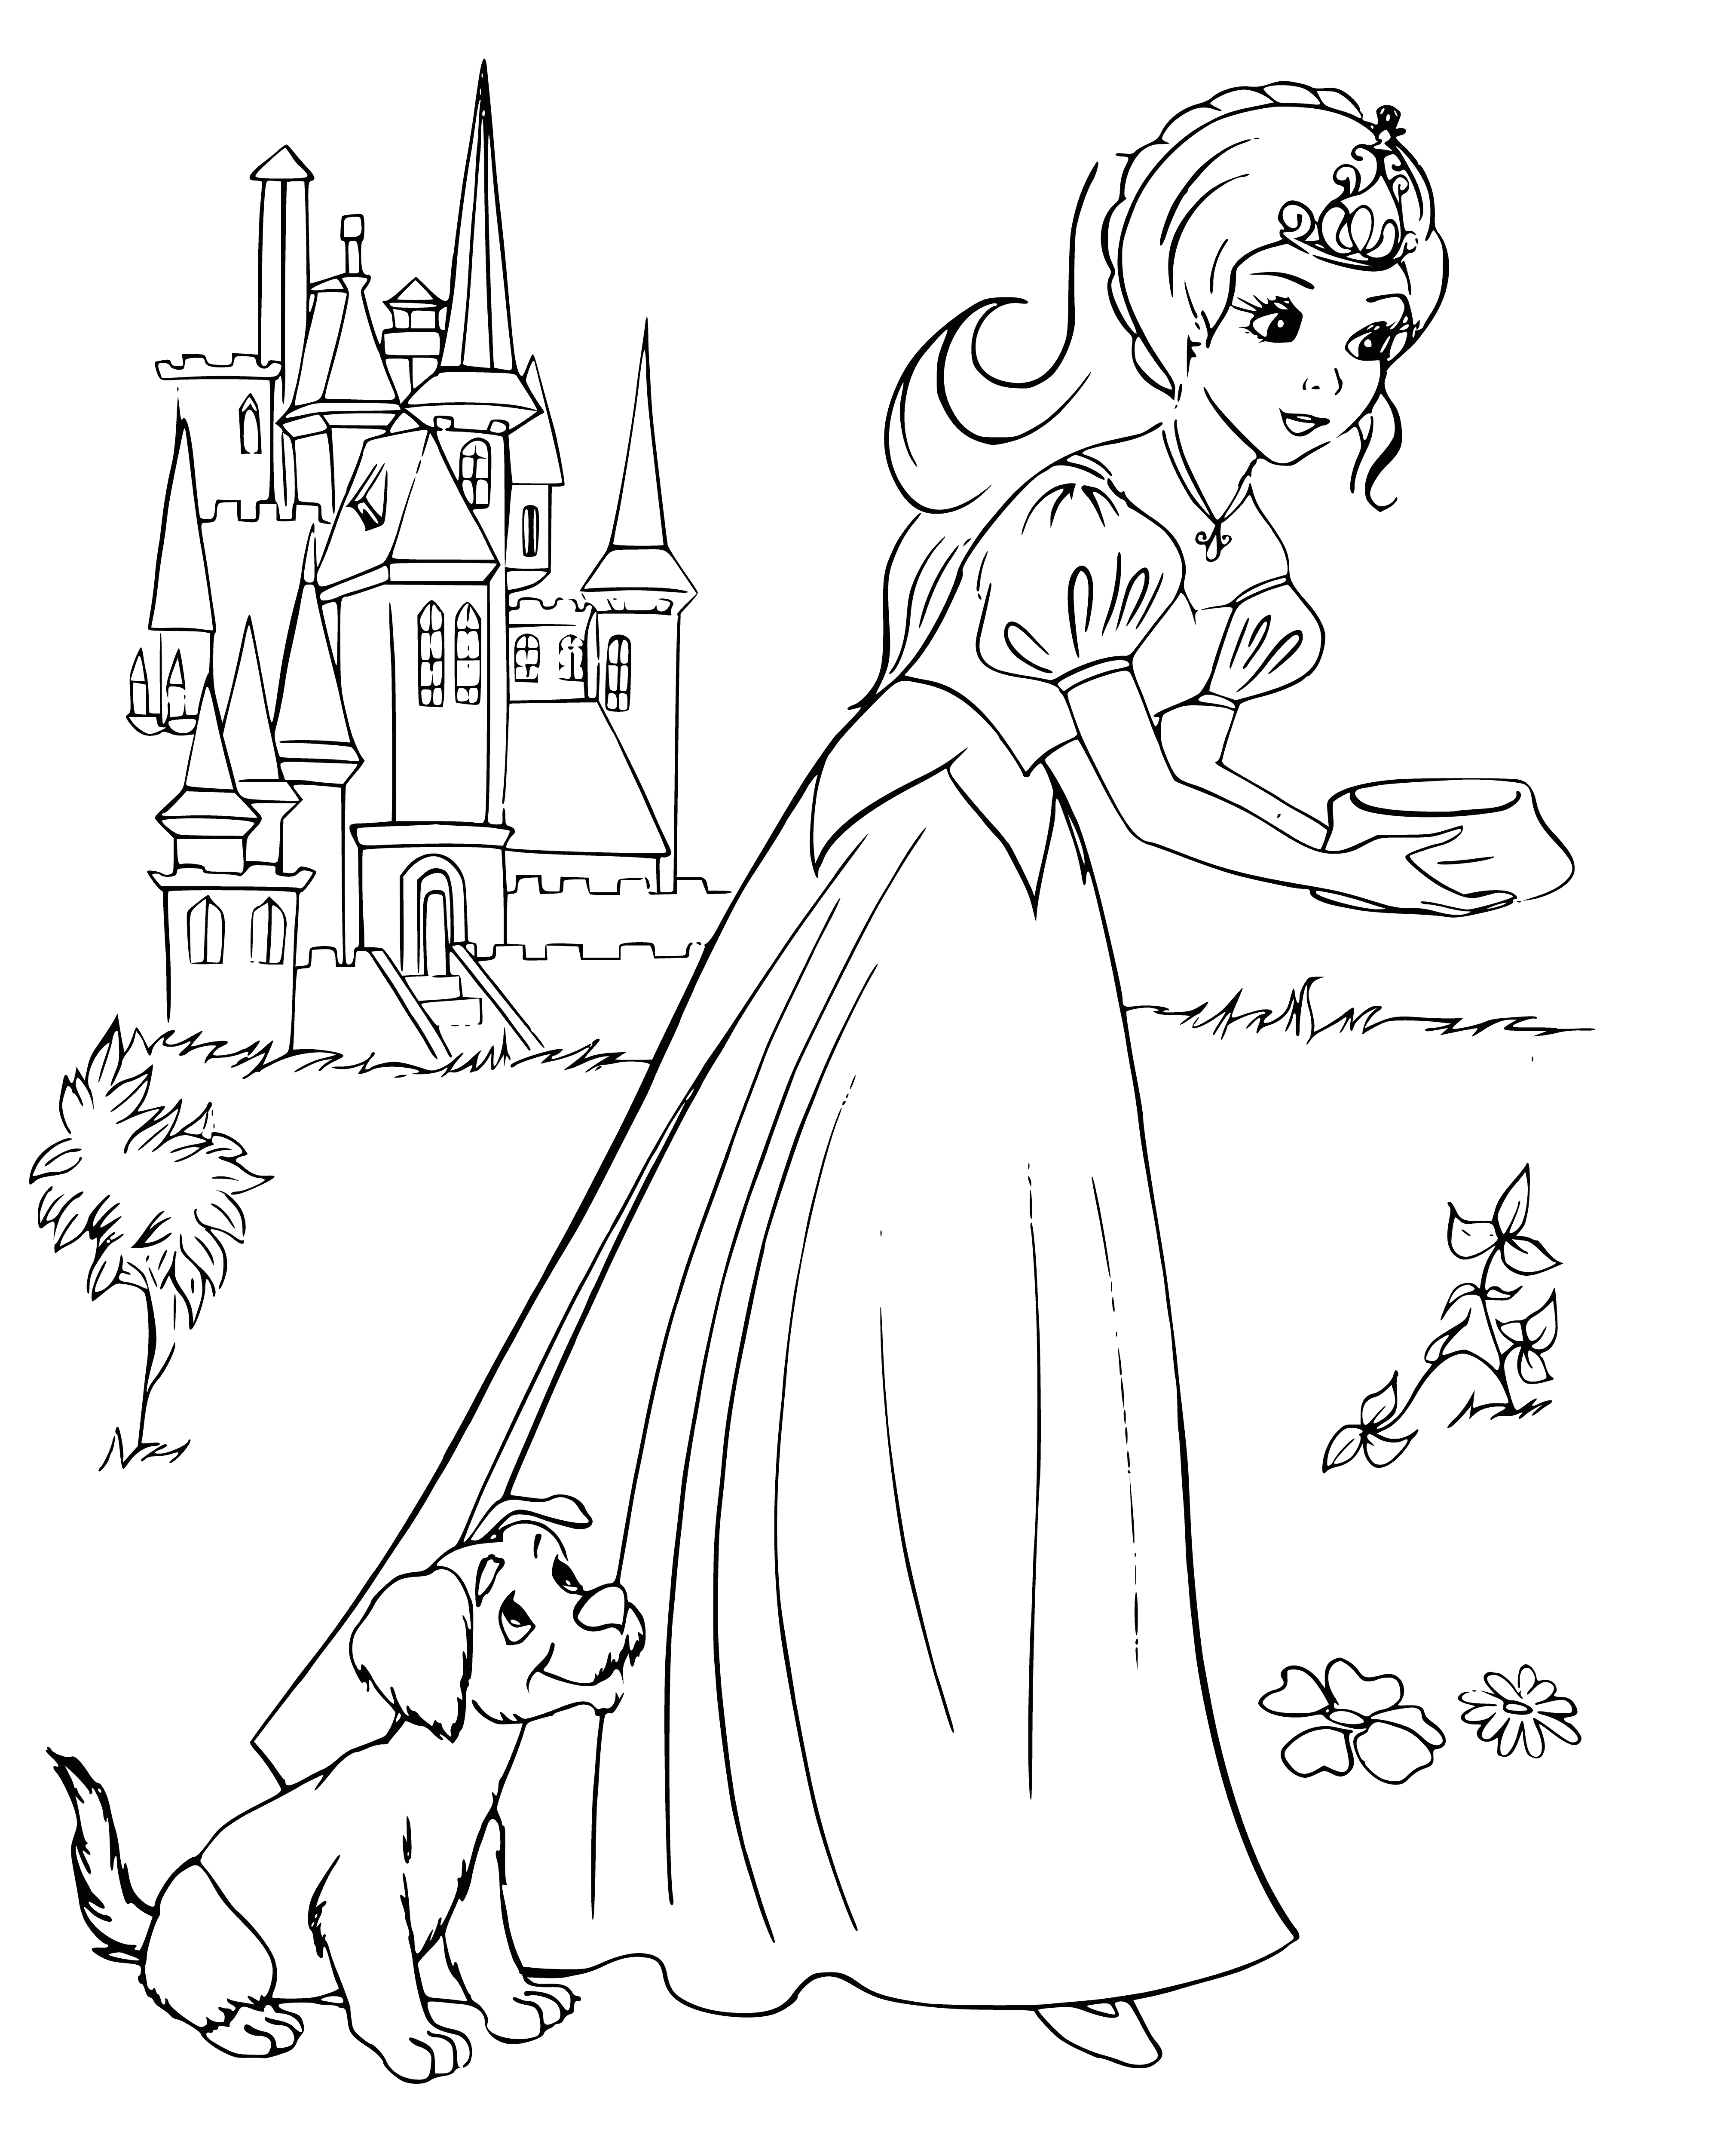 coloring page: Princess kneels to feed small puppy with bowl of food in her left hand. #animalfriend